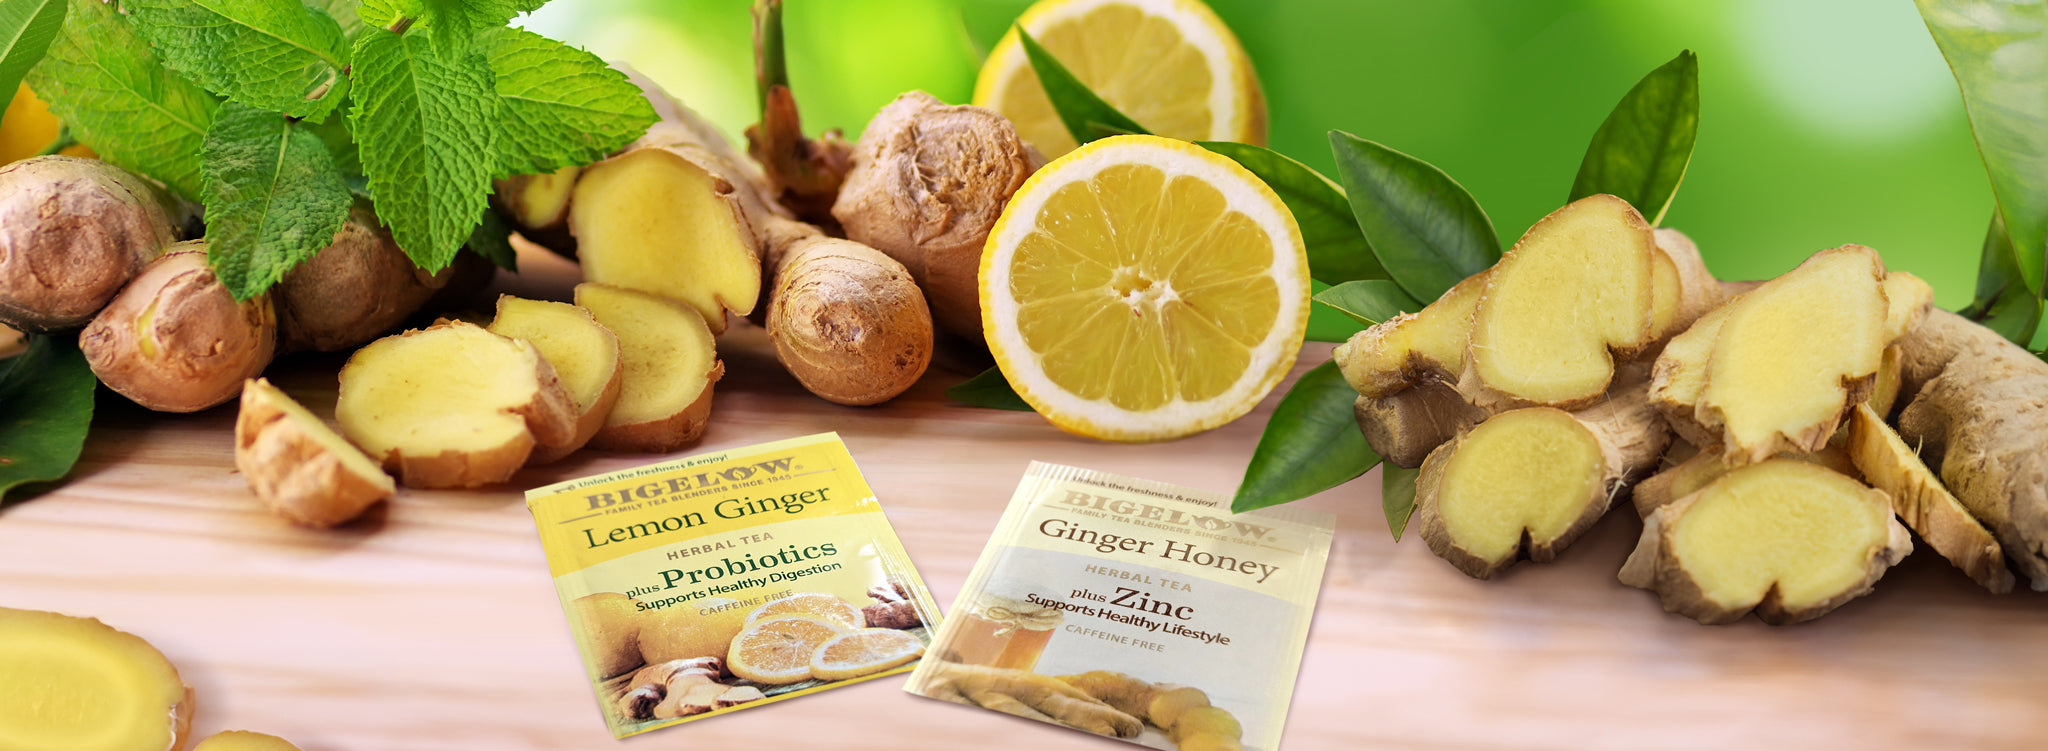 Ginger and lemon ingredients that are in Bigelow ginger teas